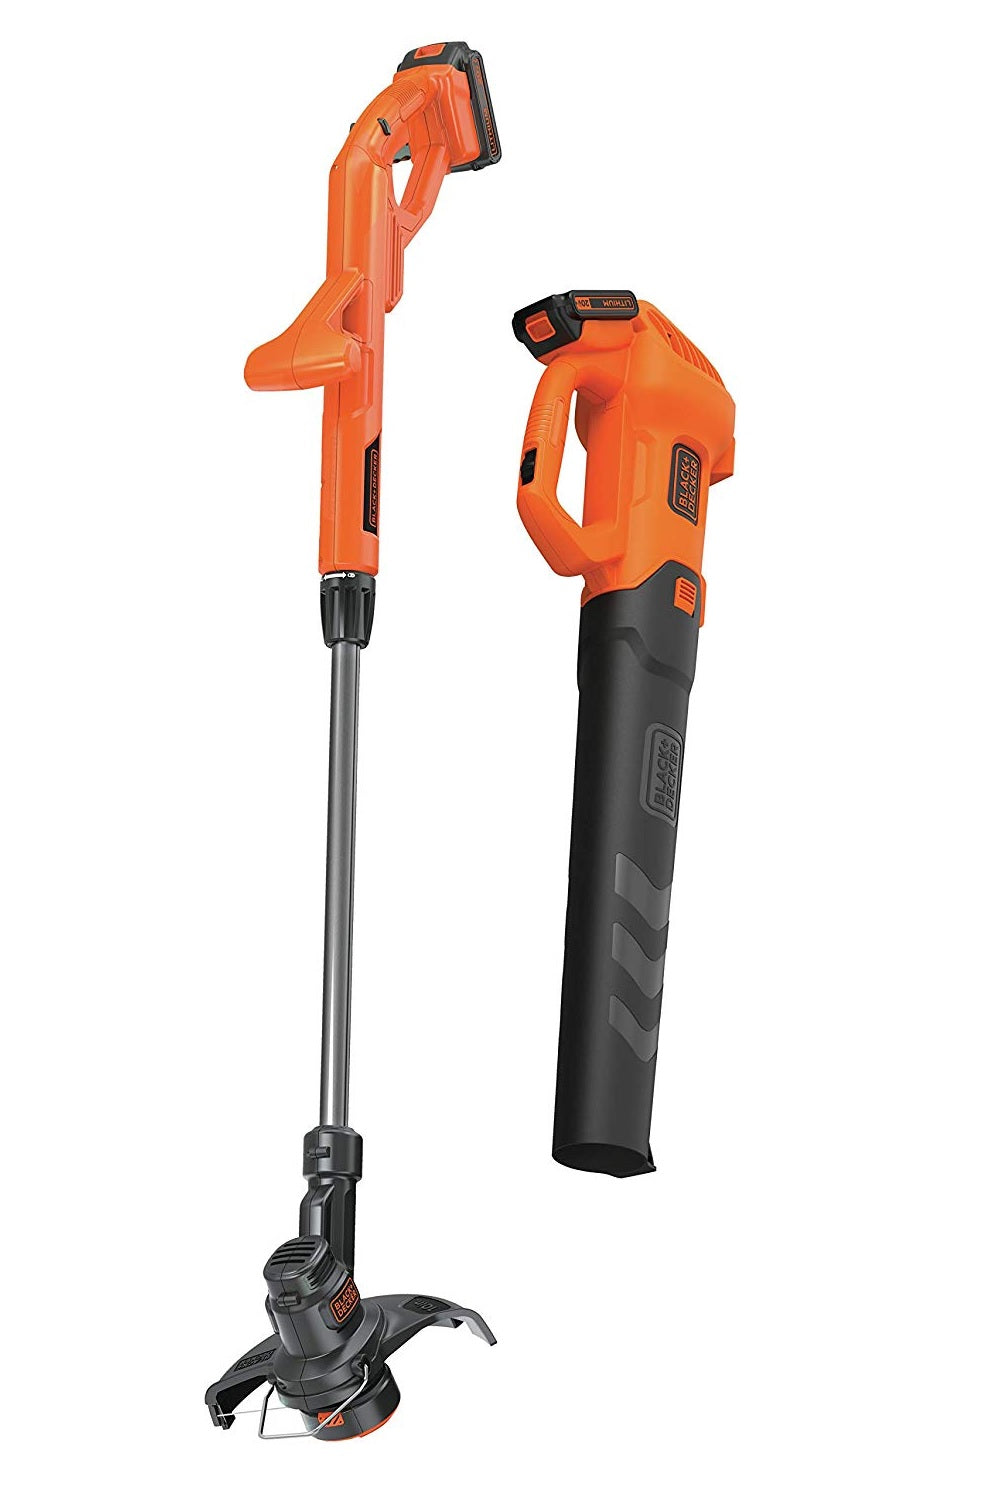 Black and Decker BCK279D2 Axial Leaf Blower and String Trimmer Combo Kit